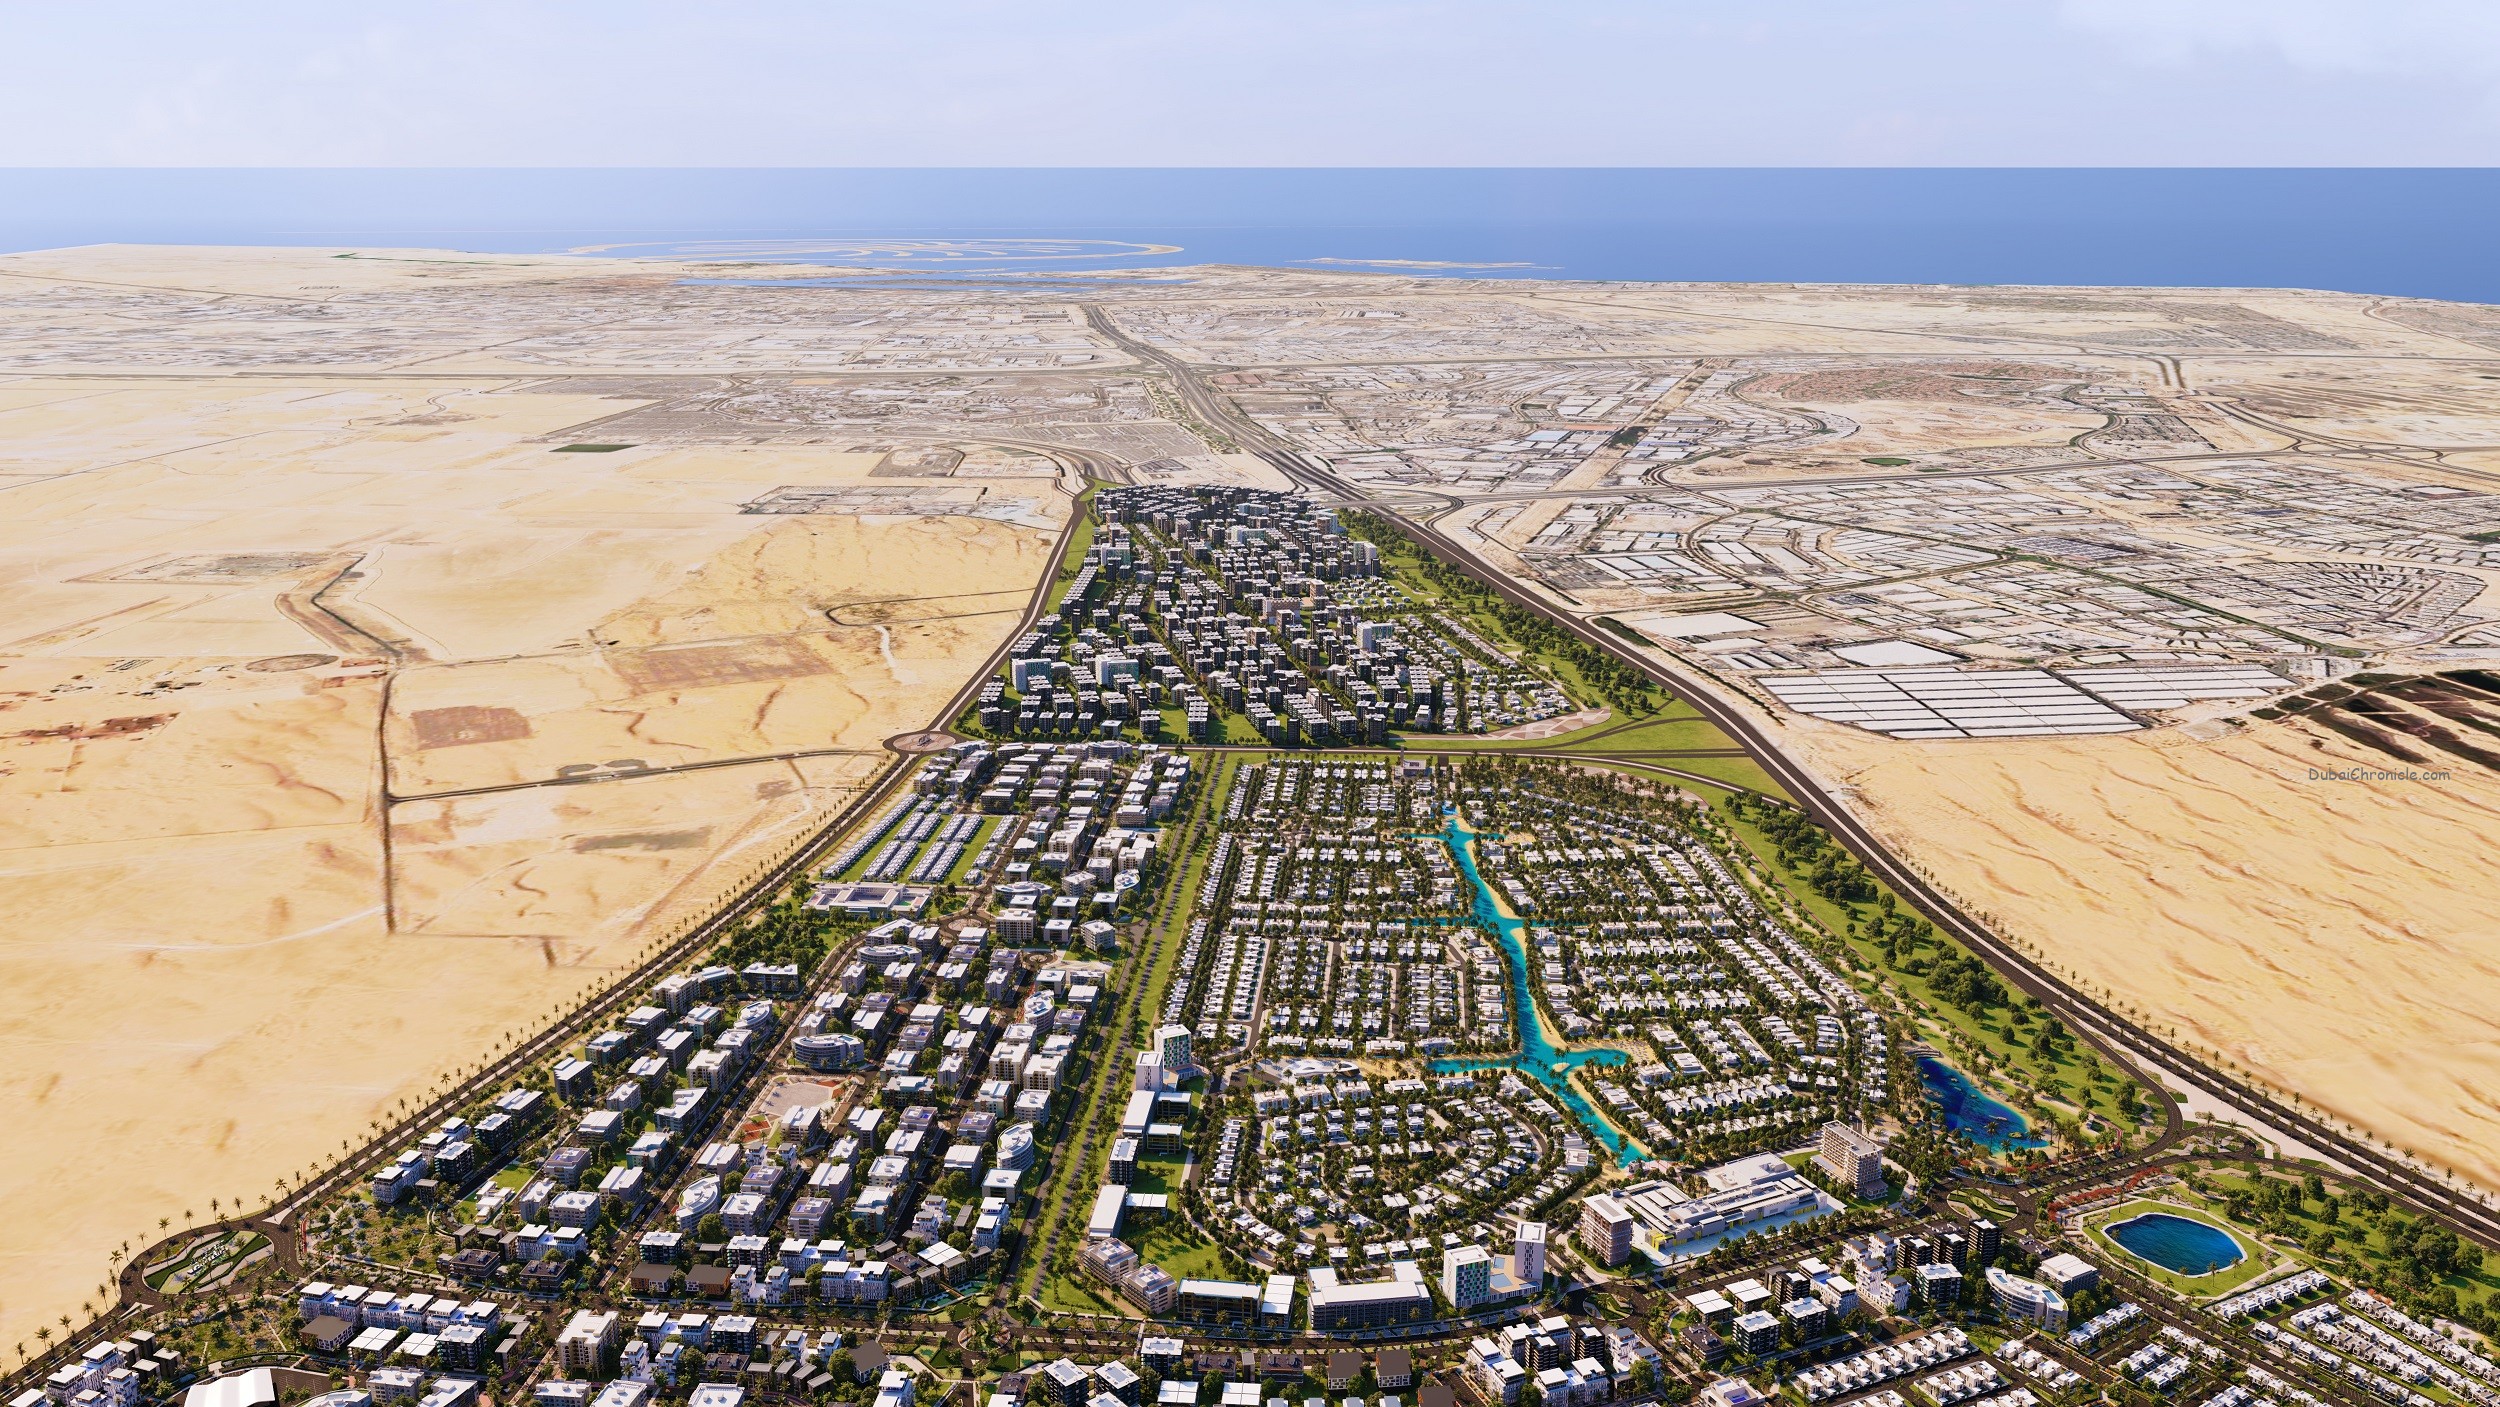 Dubai South Properties announced the launch of South Bay, a new master development in the heart of The Residential District at Dubai South.